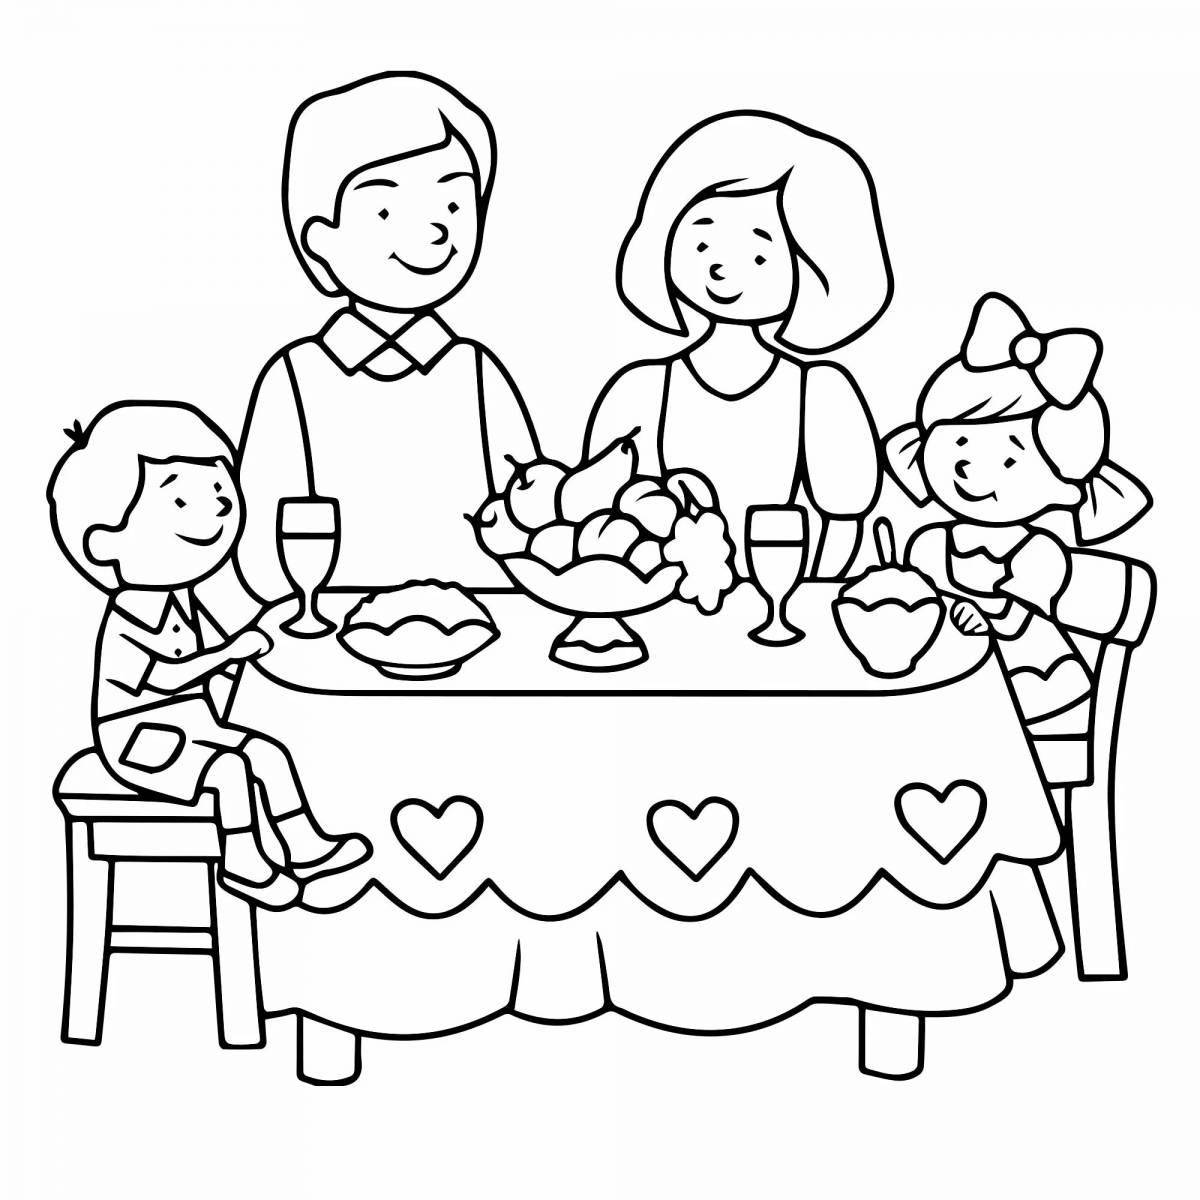 Colorful family coloring book for 7 year olds